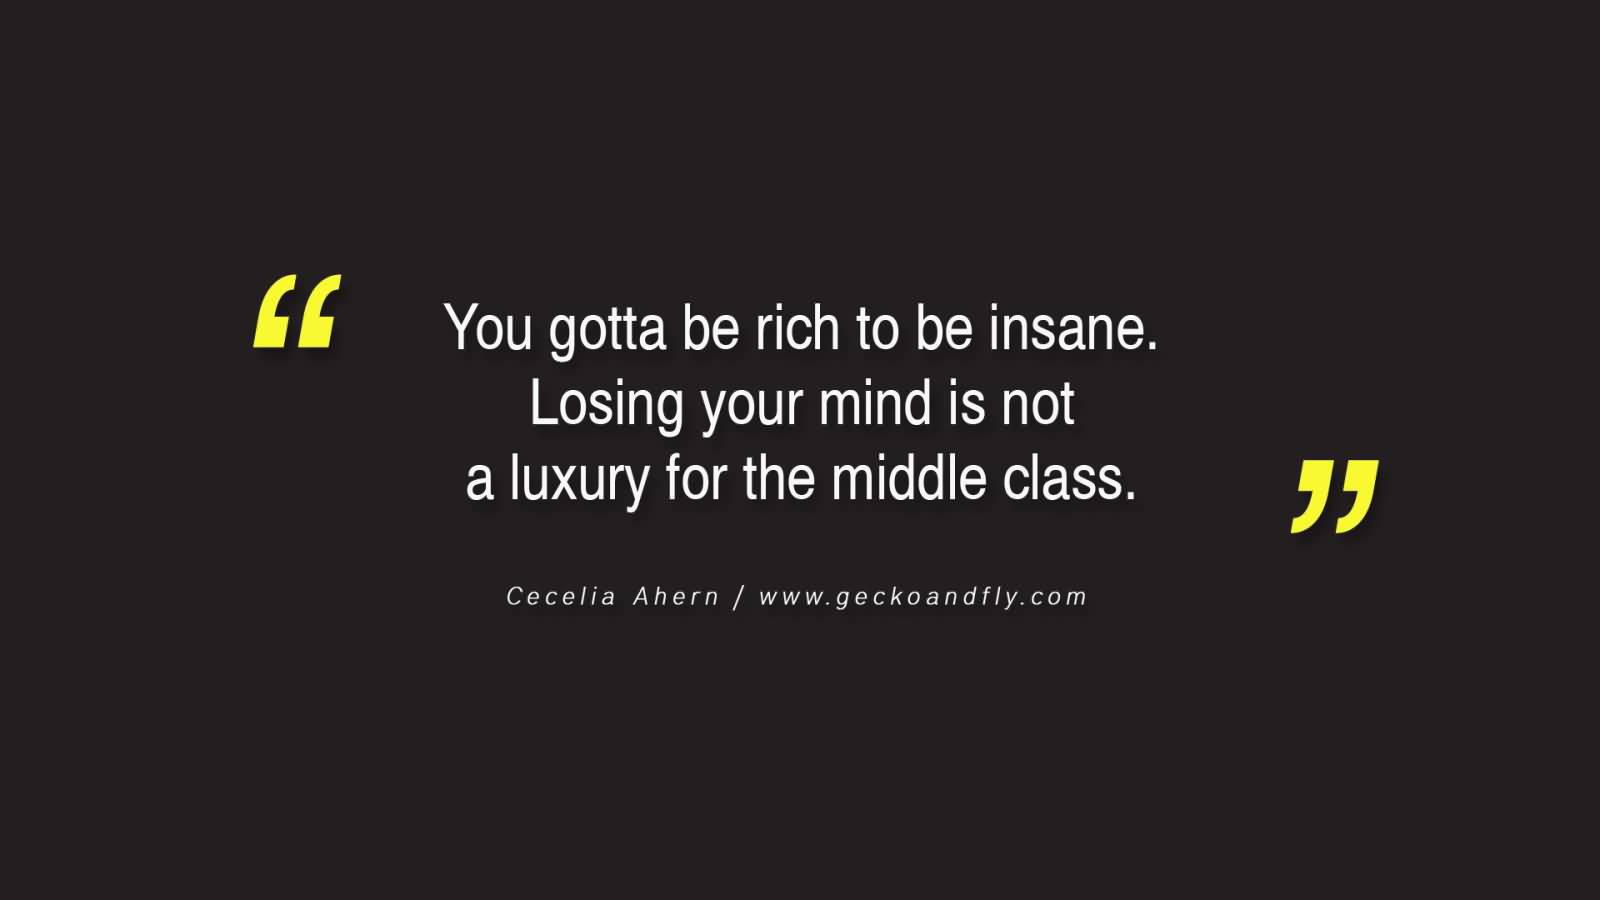 You gotta be rich to be insane. Losing your mind is not a luxury for the middle class. Cecelia Ahern